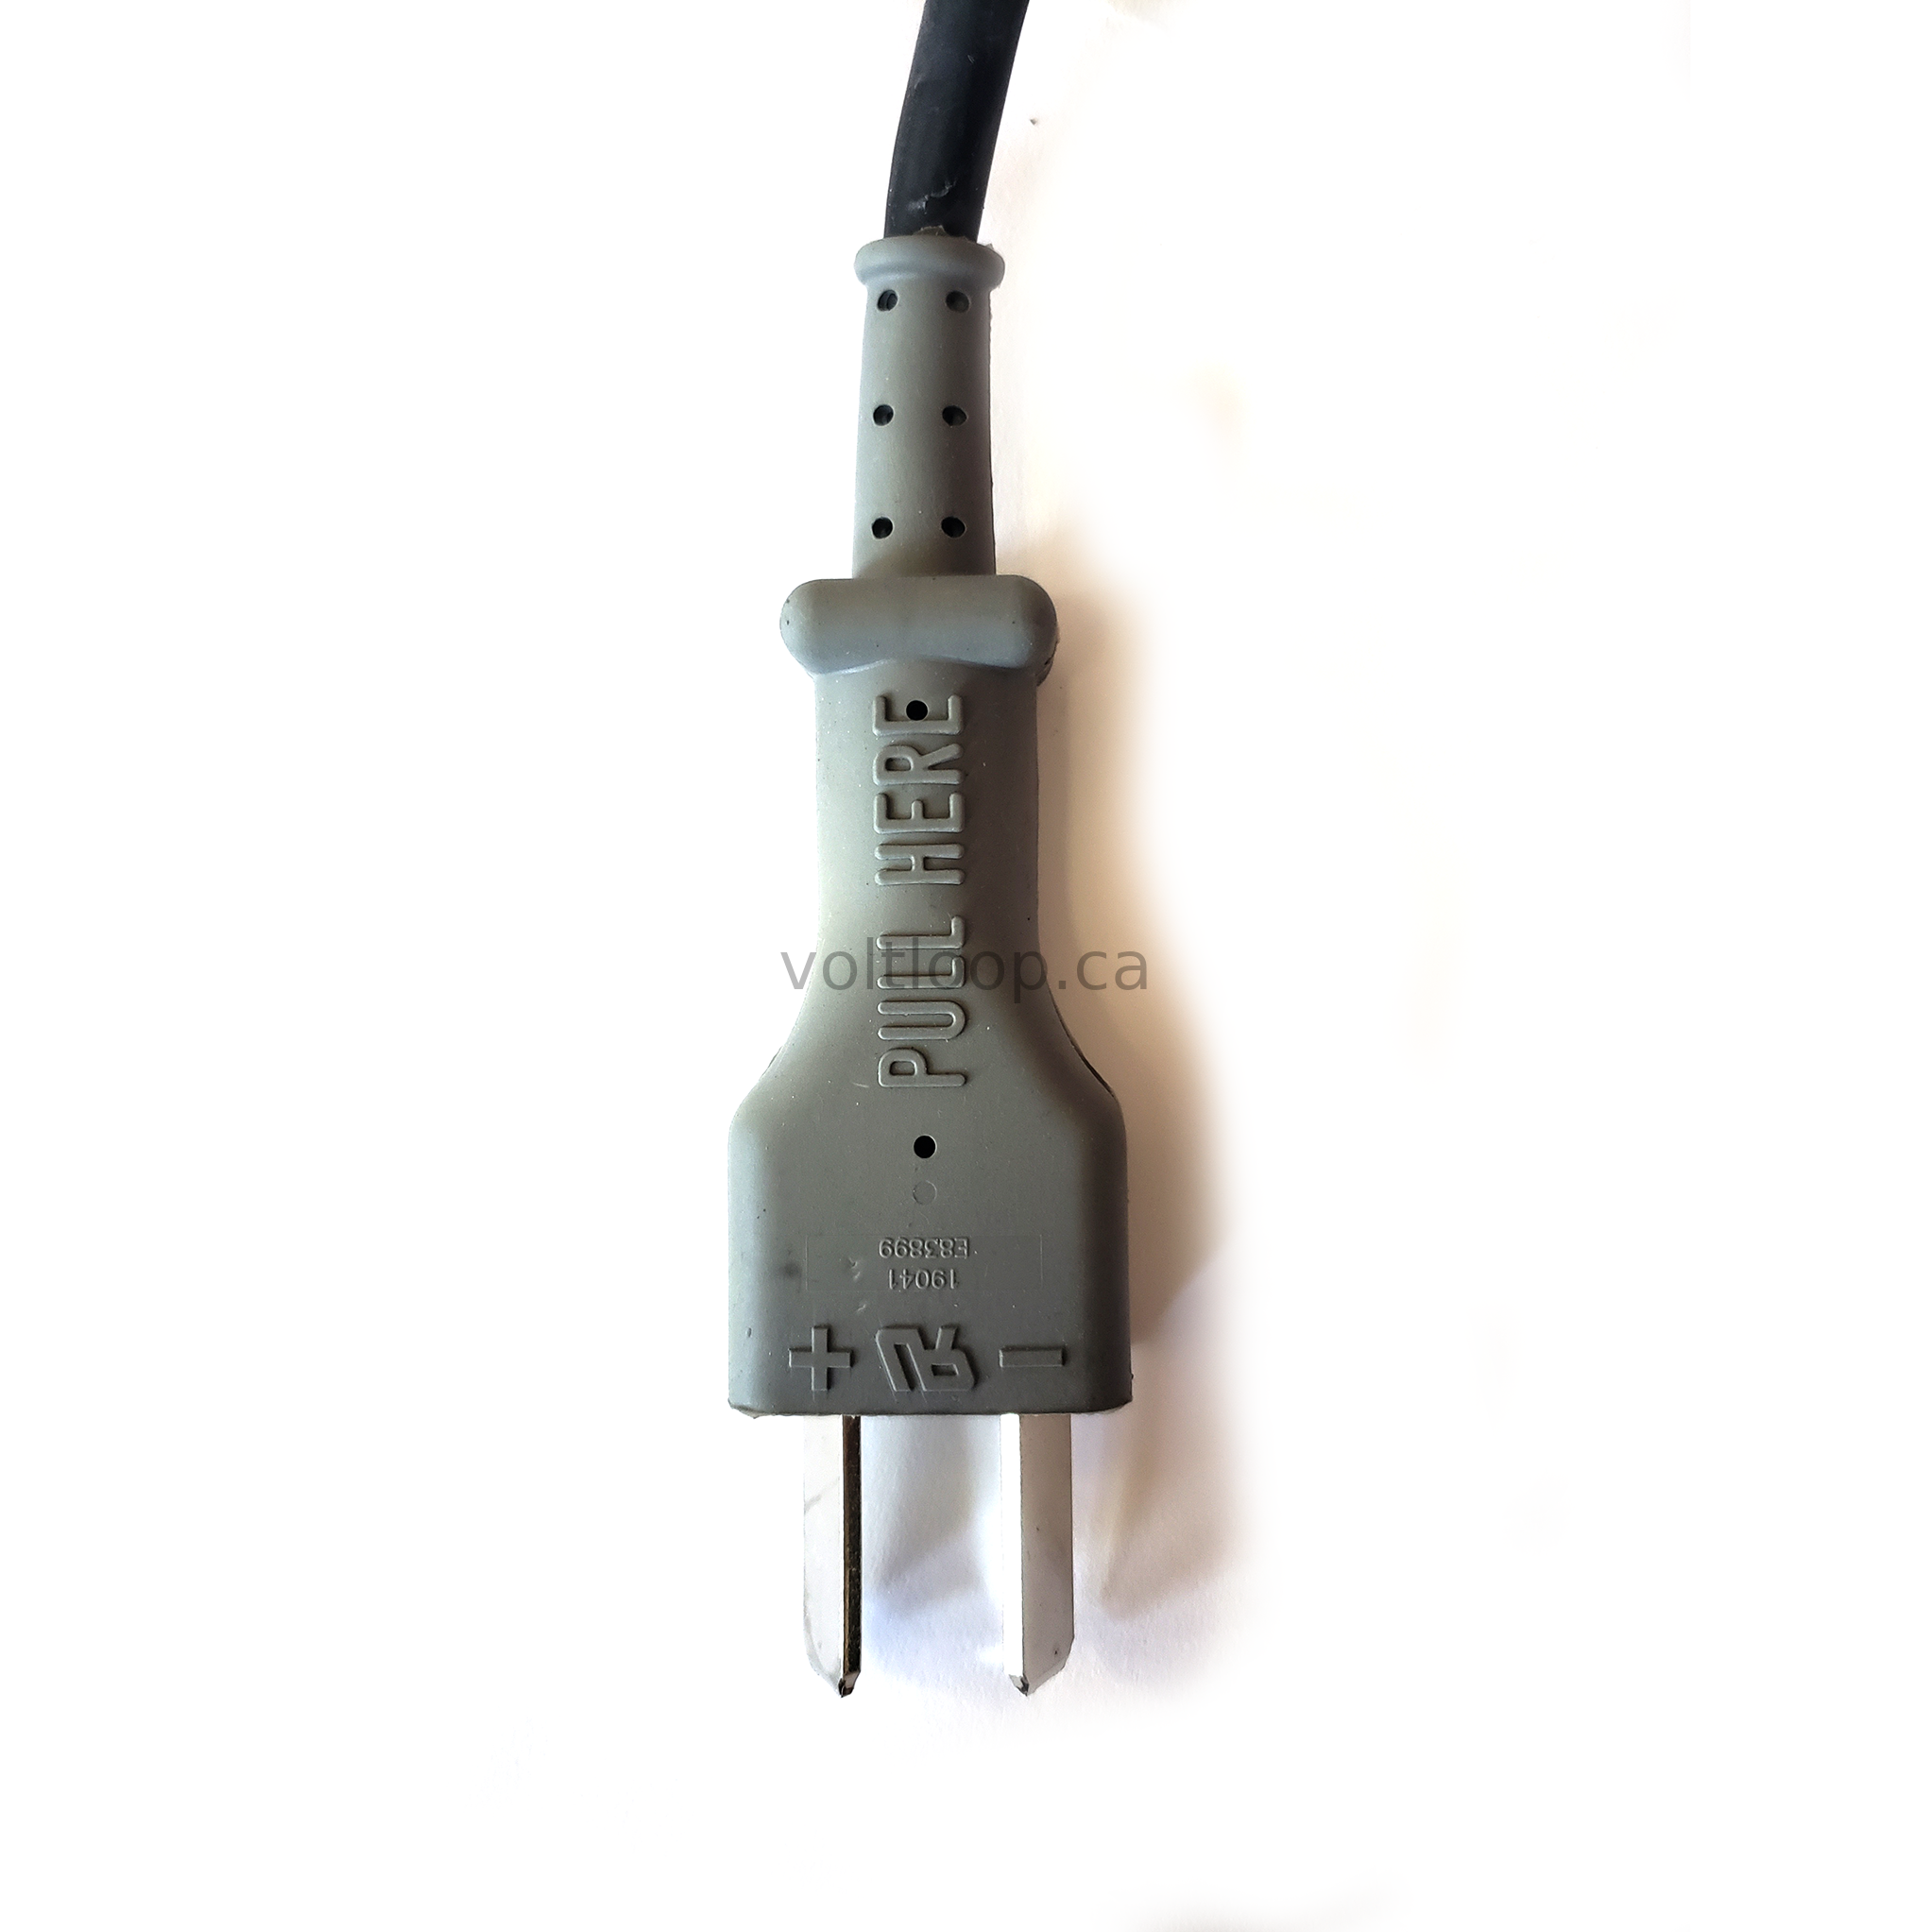 Crowfoot 2 Blade Connector with 8ft 12 AWG DC Cord